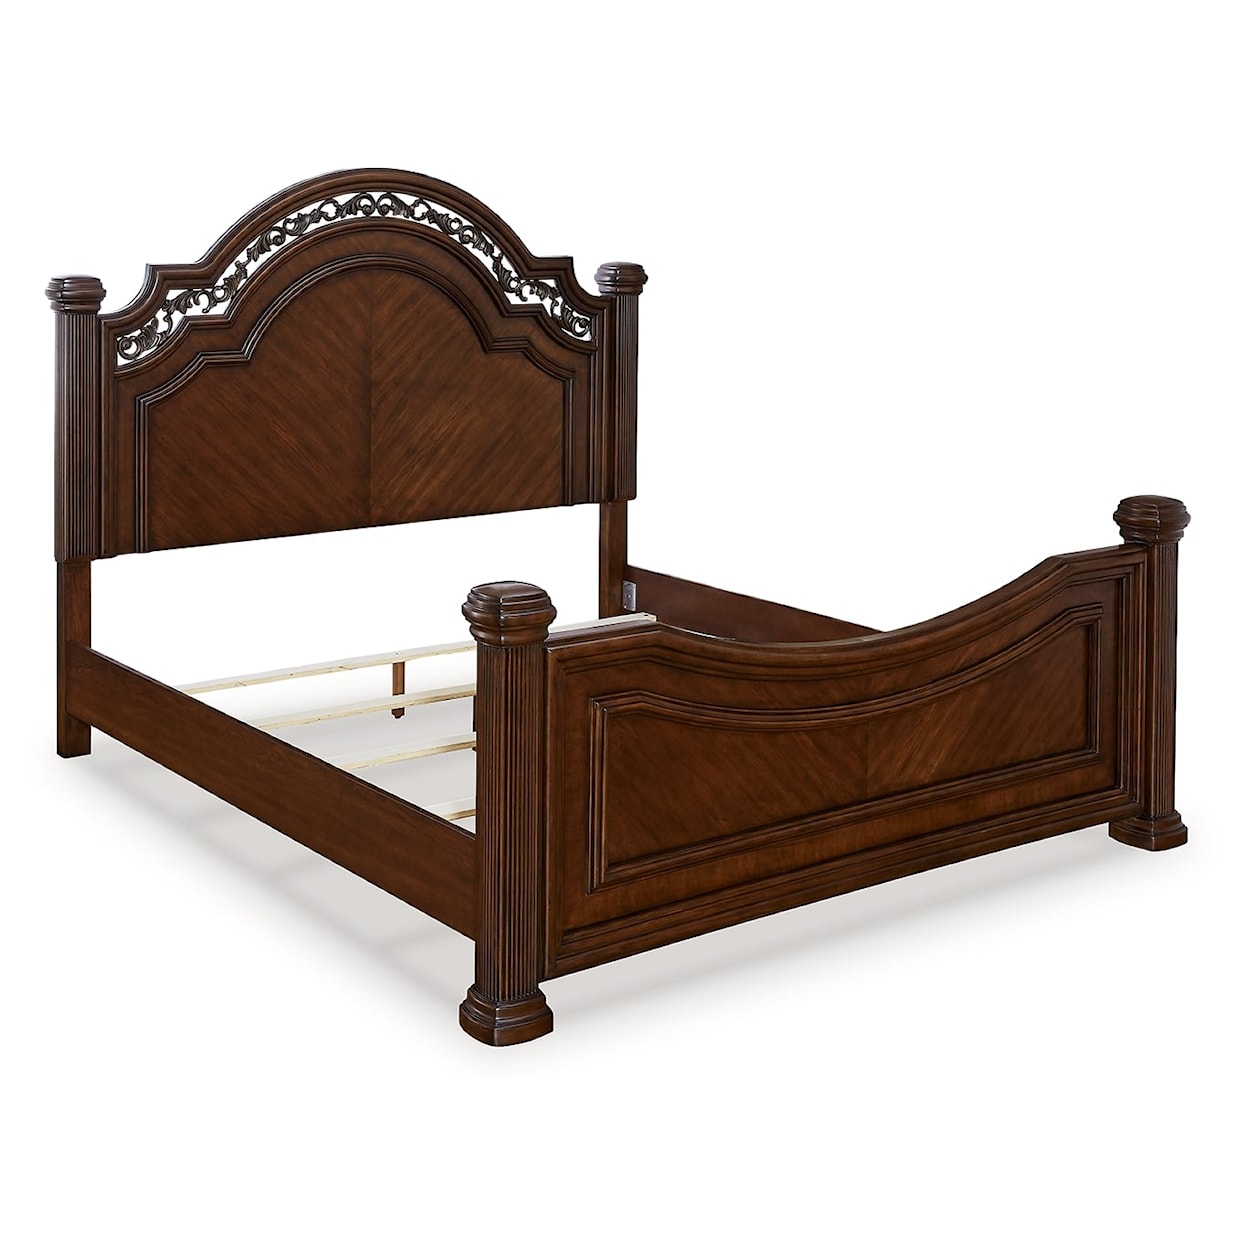 Signature Design by Ashley Furniture Lavinton King Poster Bed